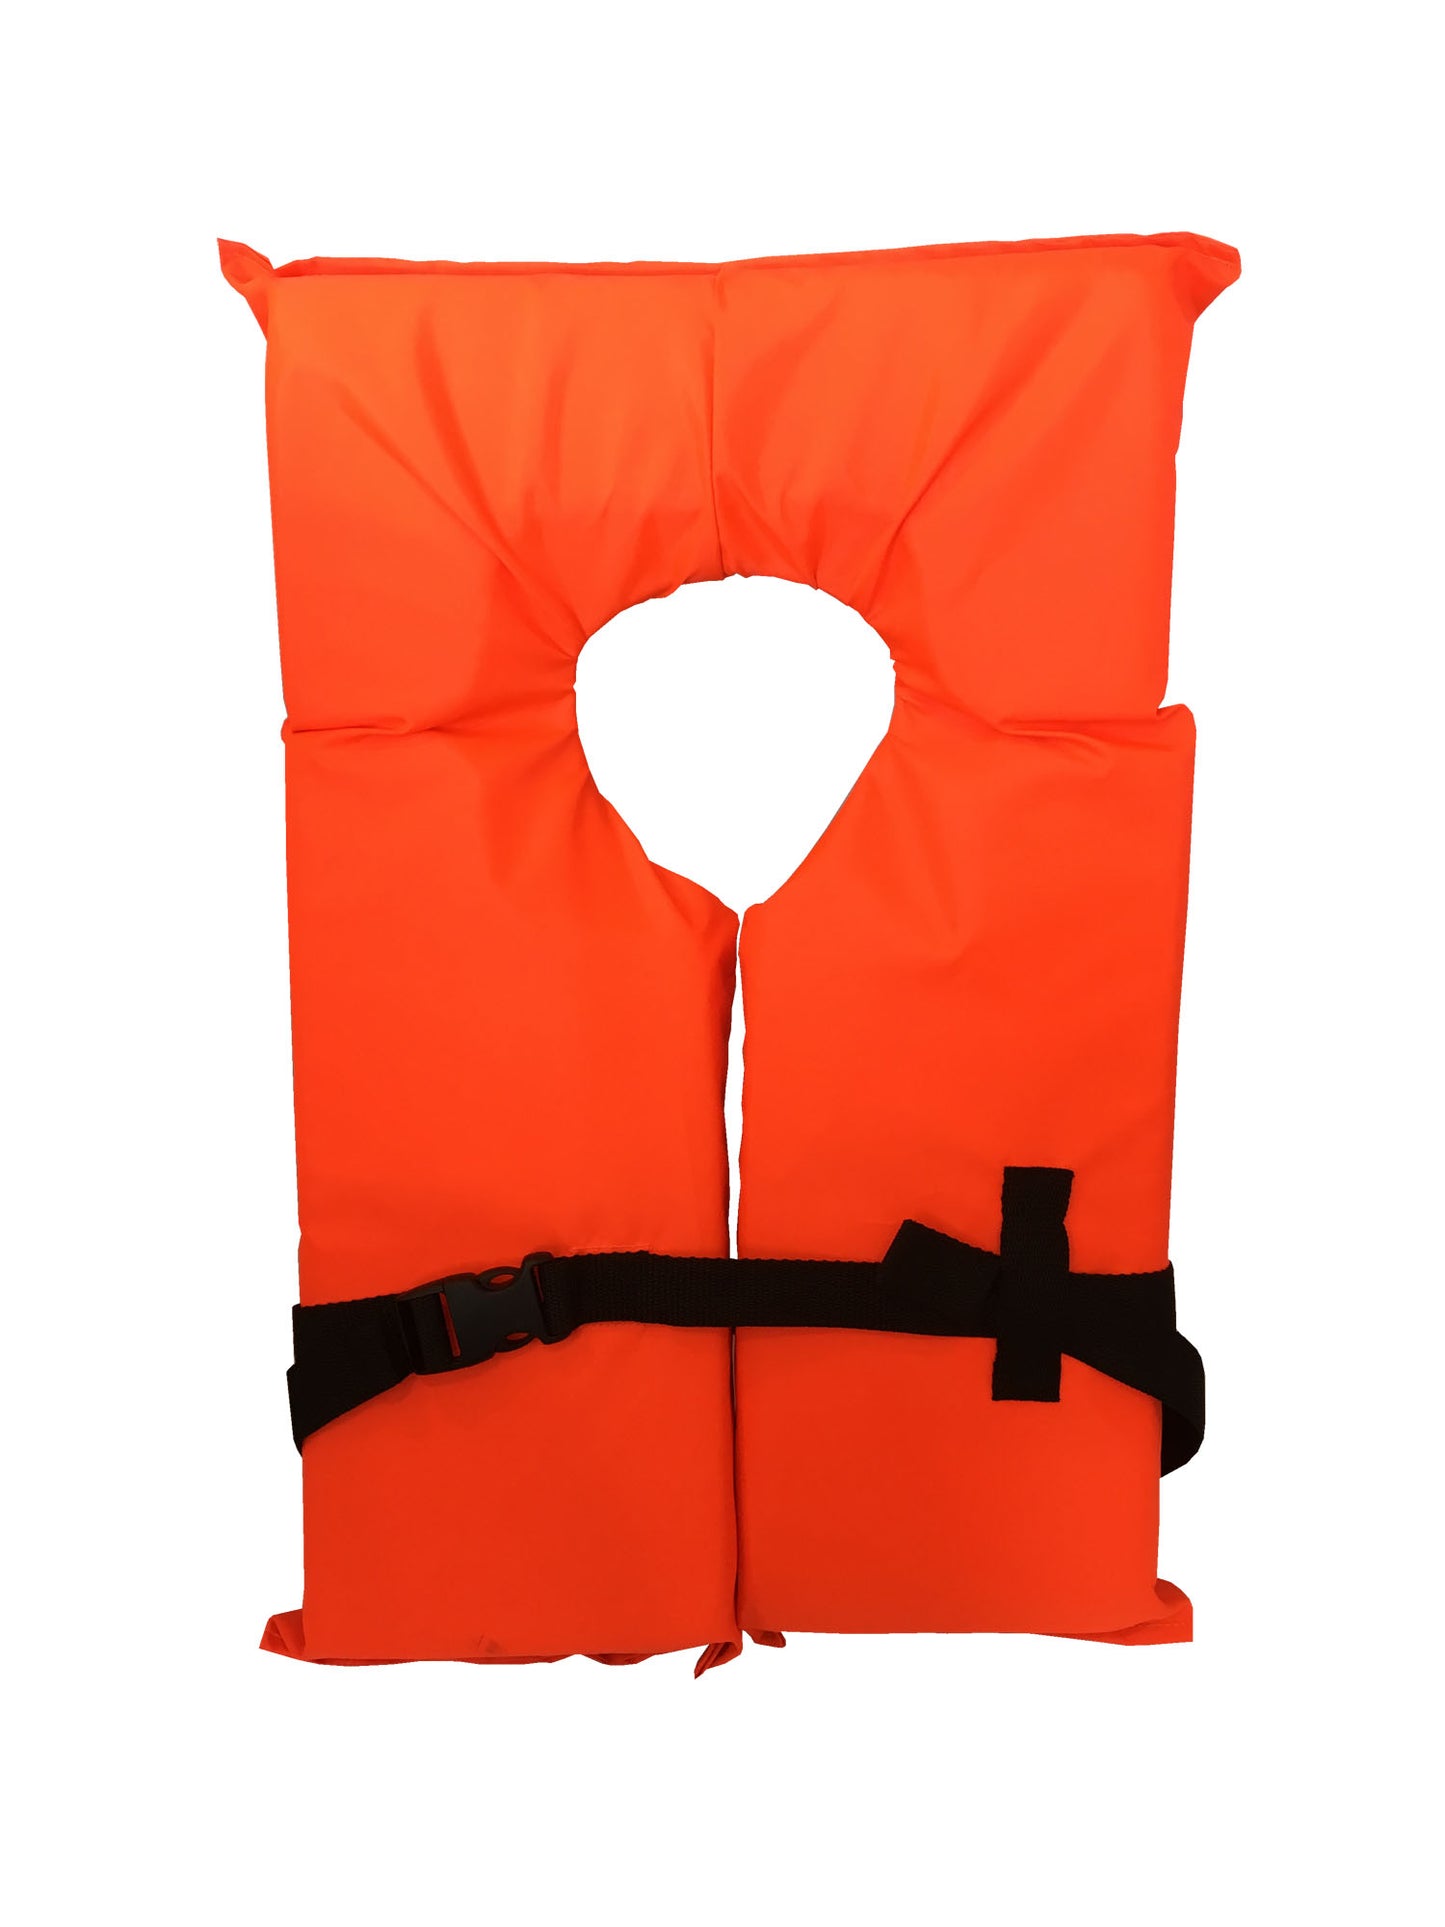 Hardcore Coast Guard approved life jackets for adults.  Camo color Type II keyhole life vest in classic May West style. Compliance life vests and flotation device (2 pack)